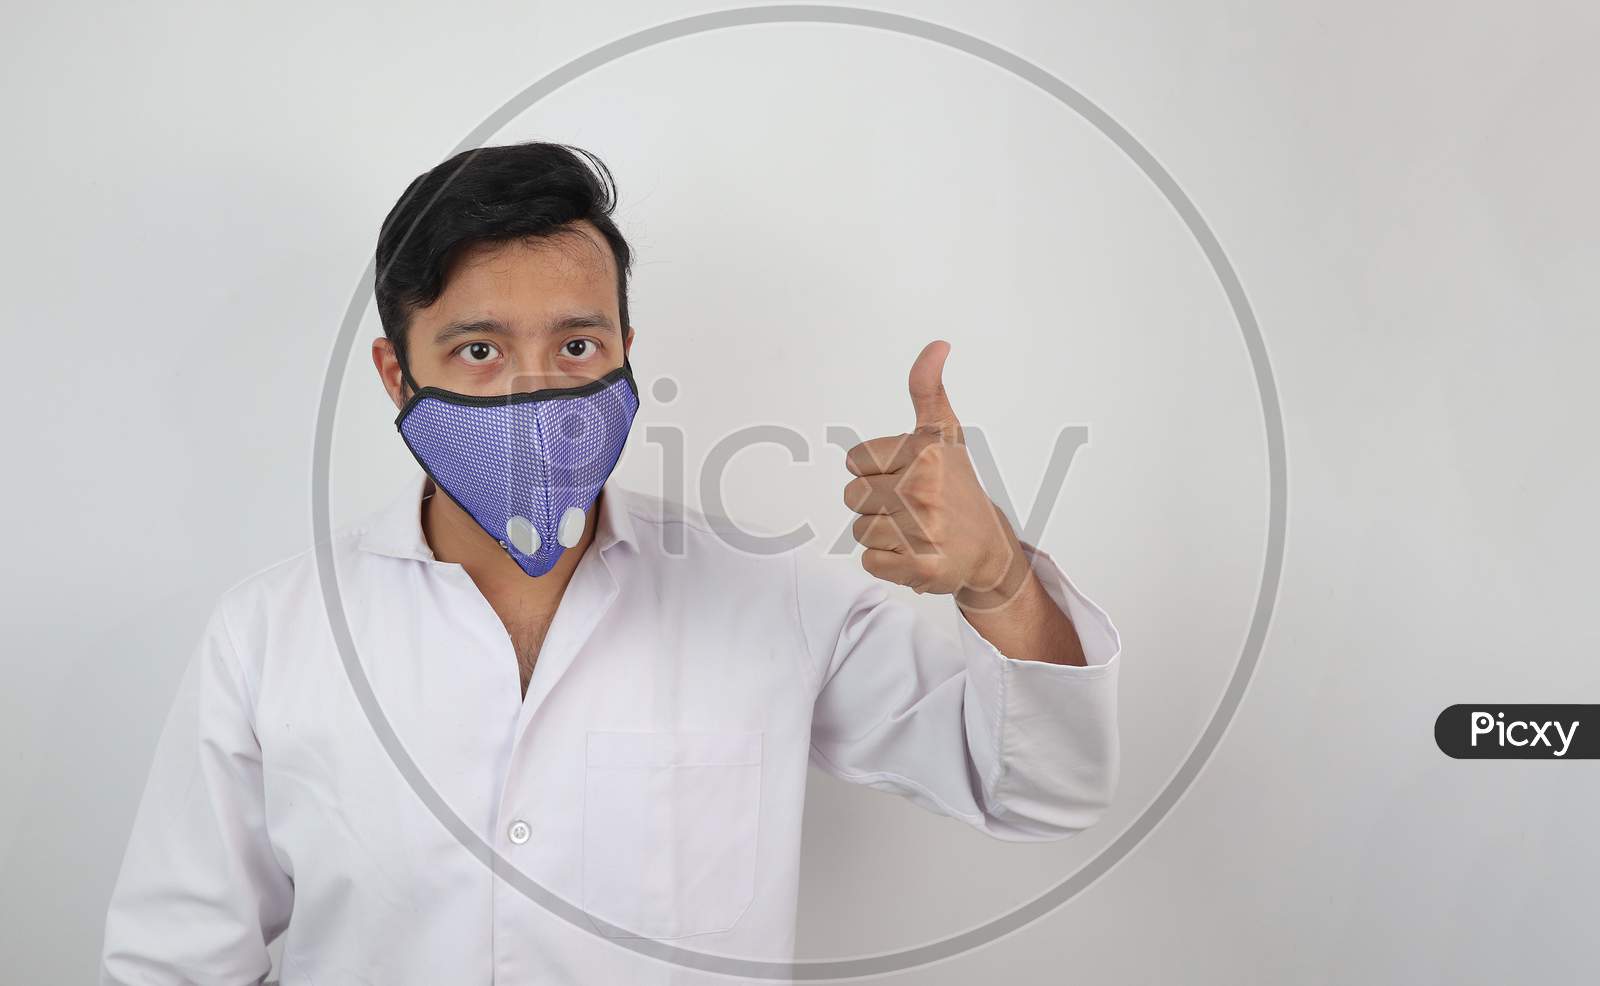 A Medical Professional In White Coat And N 99 Mask With Thumbs Up Positive Expression Isolated In White Background With Space For Text.